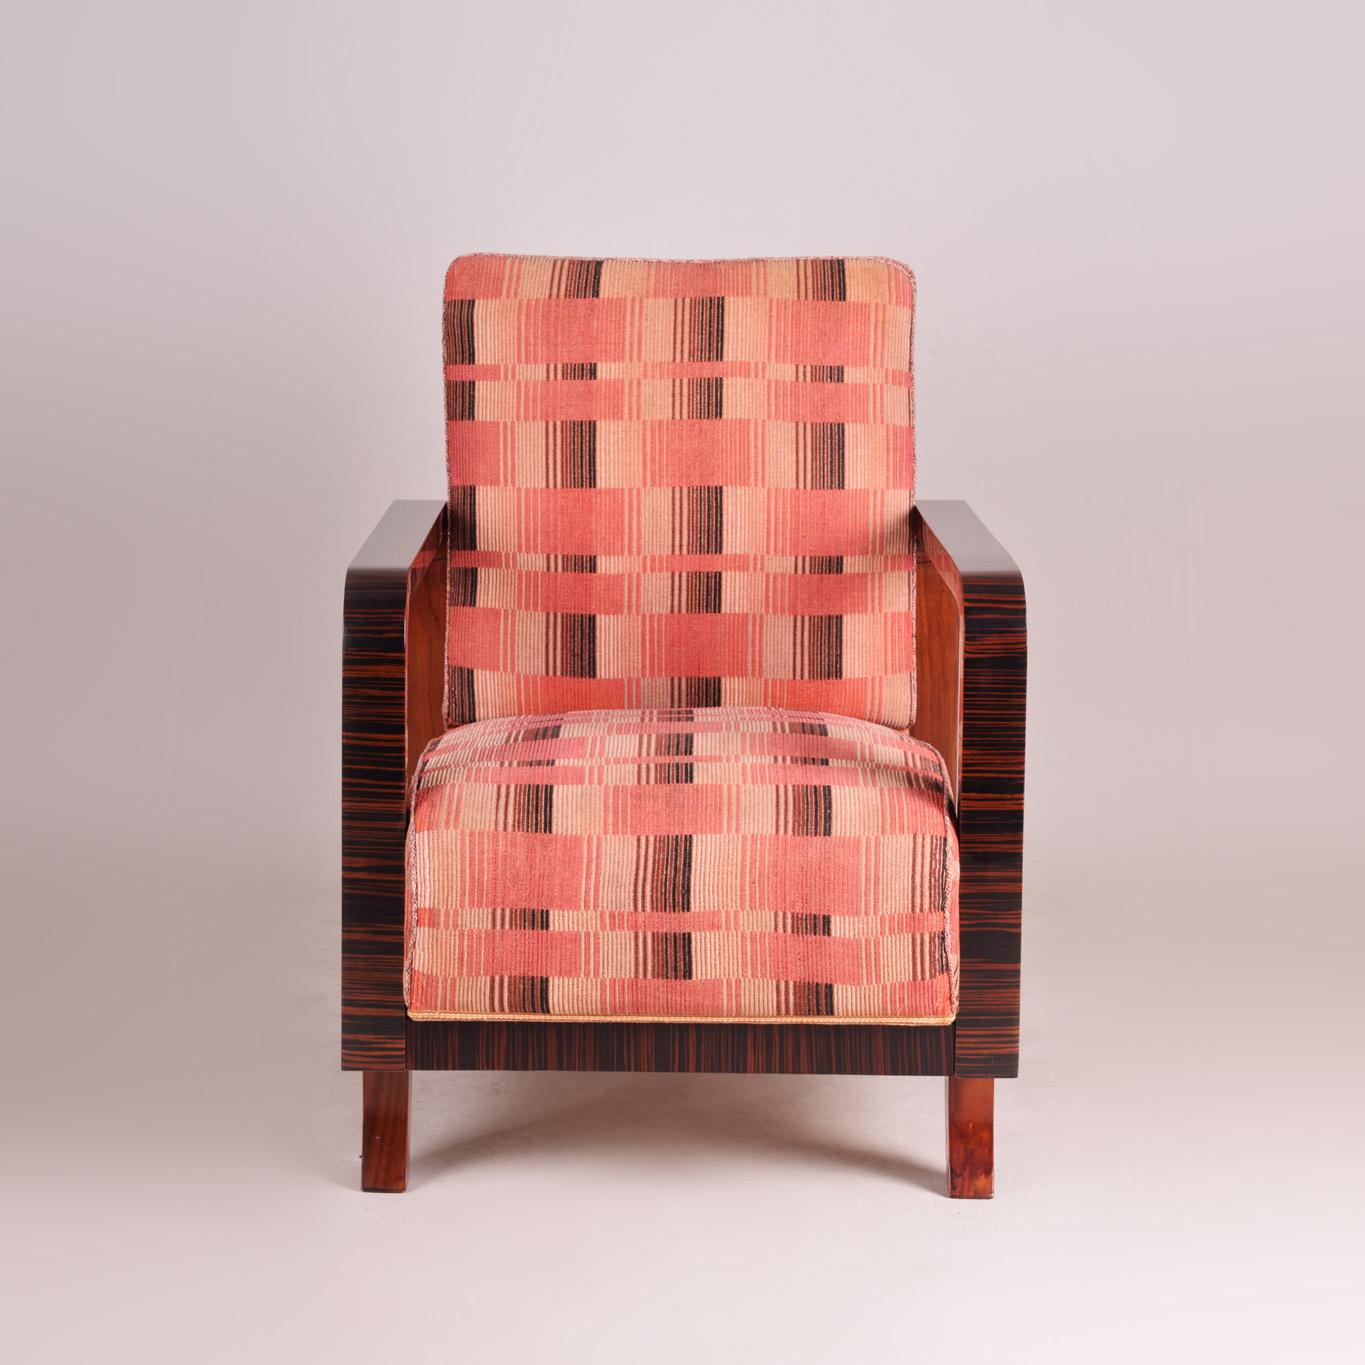 Pink Art Deco Armchair, Made in 1930s Czechia and Restored, Original Fabric In Good Condition For Sale In Horomerice, CZ